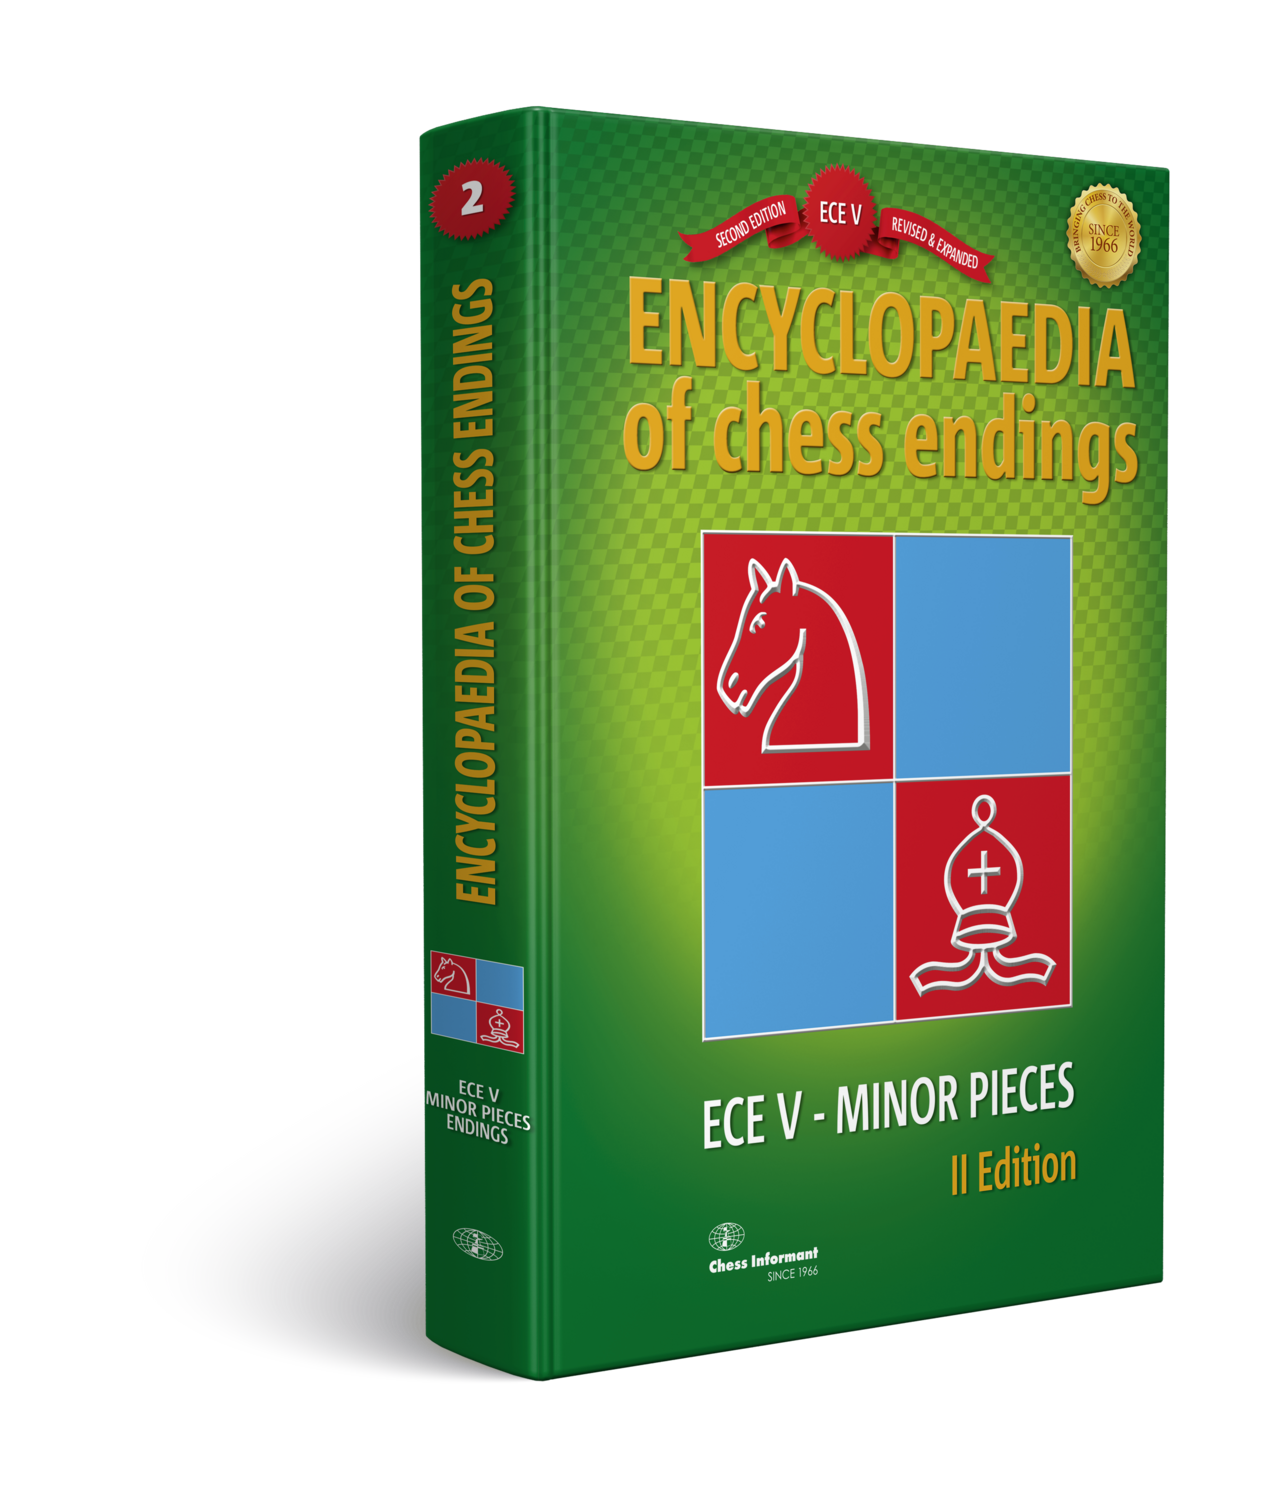 Encyclopedia of Chess Endings V - Minor Pieces